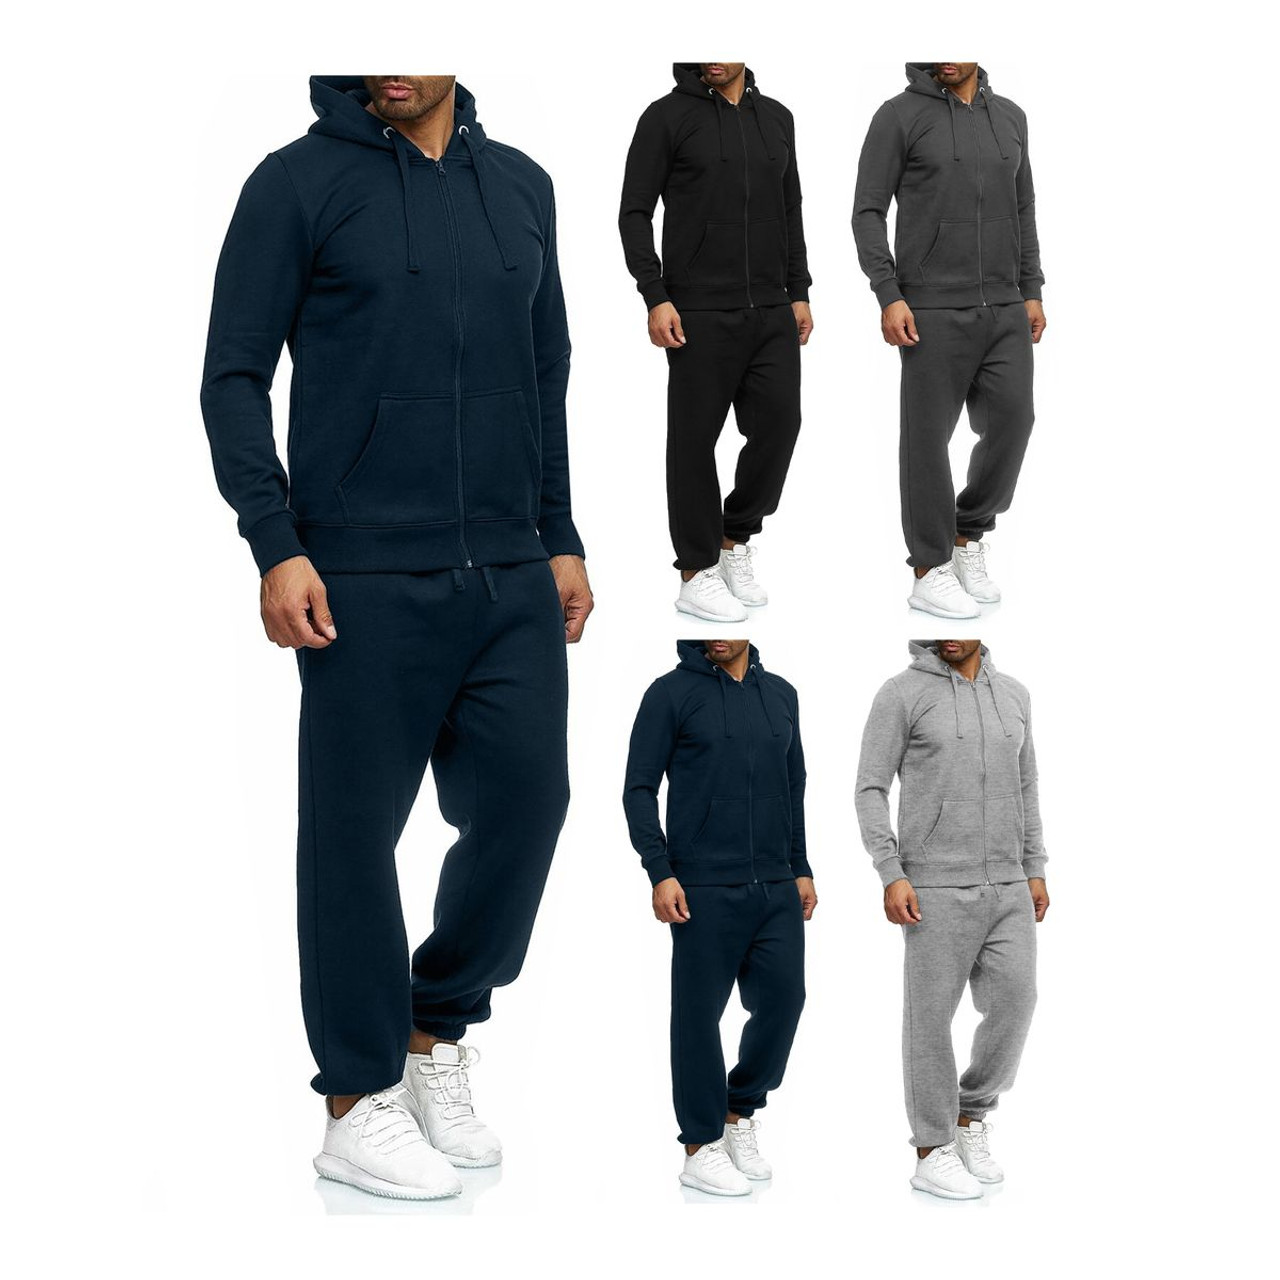 Embroidered Mens Plus Size Tracksuits Set With Hoodie, Sweatshirt, And Pants  Asian Size M 3XL From Byron12, $73.51 | DHgate.Com